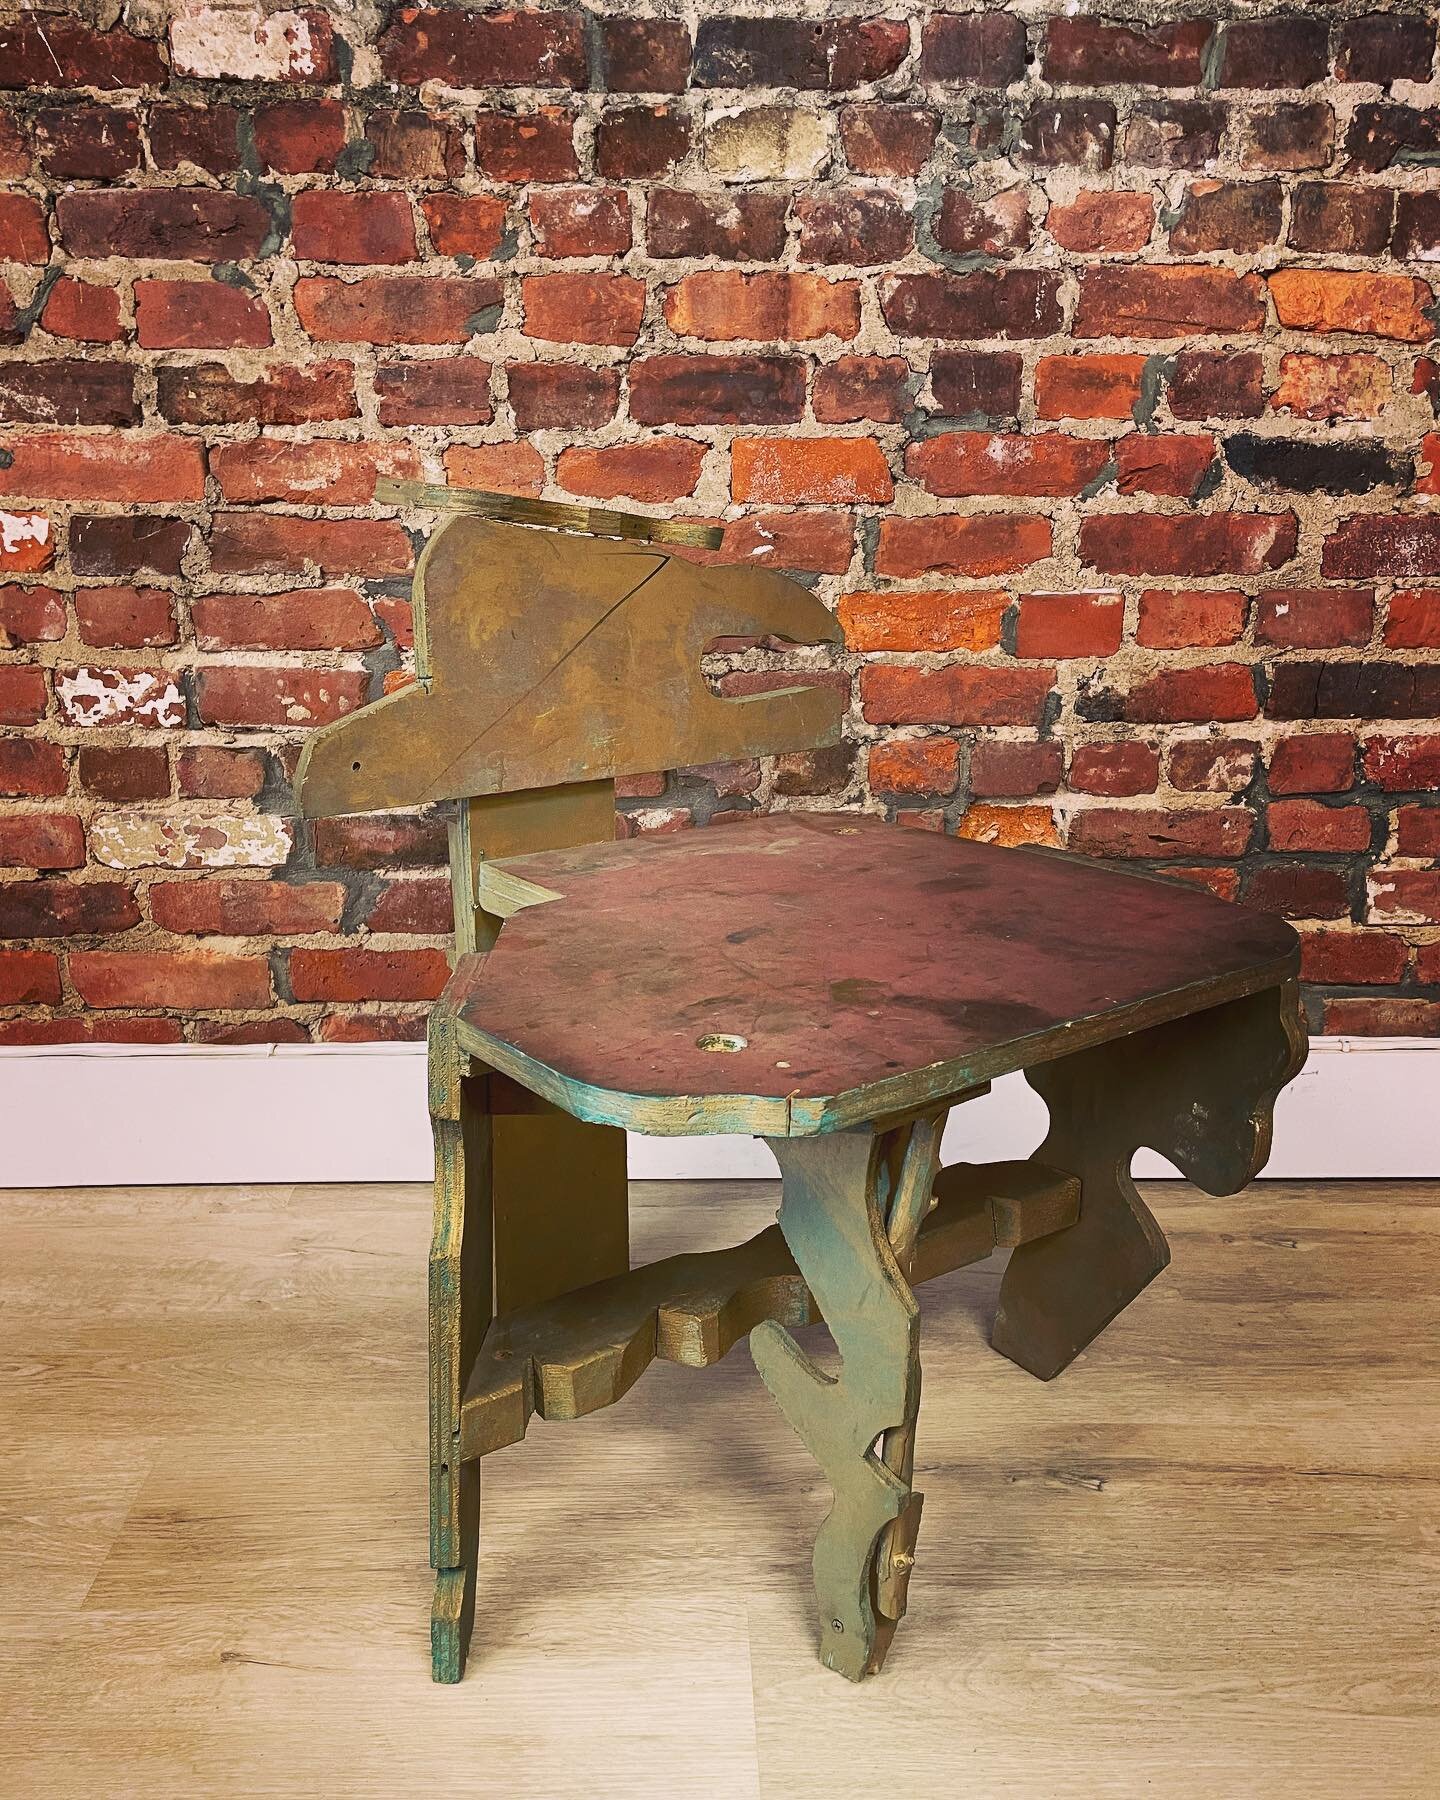 💥For Sale!💥 ART ART ART ART ART ART ART.  I love art.  I love sculpture. I love weird shapes and colors whose only reason to be is to look cool. So here&rsquo;s this!  Sculptural art table attributed to NY artist and teacher Robert Harding, one of 